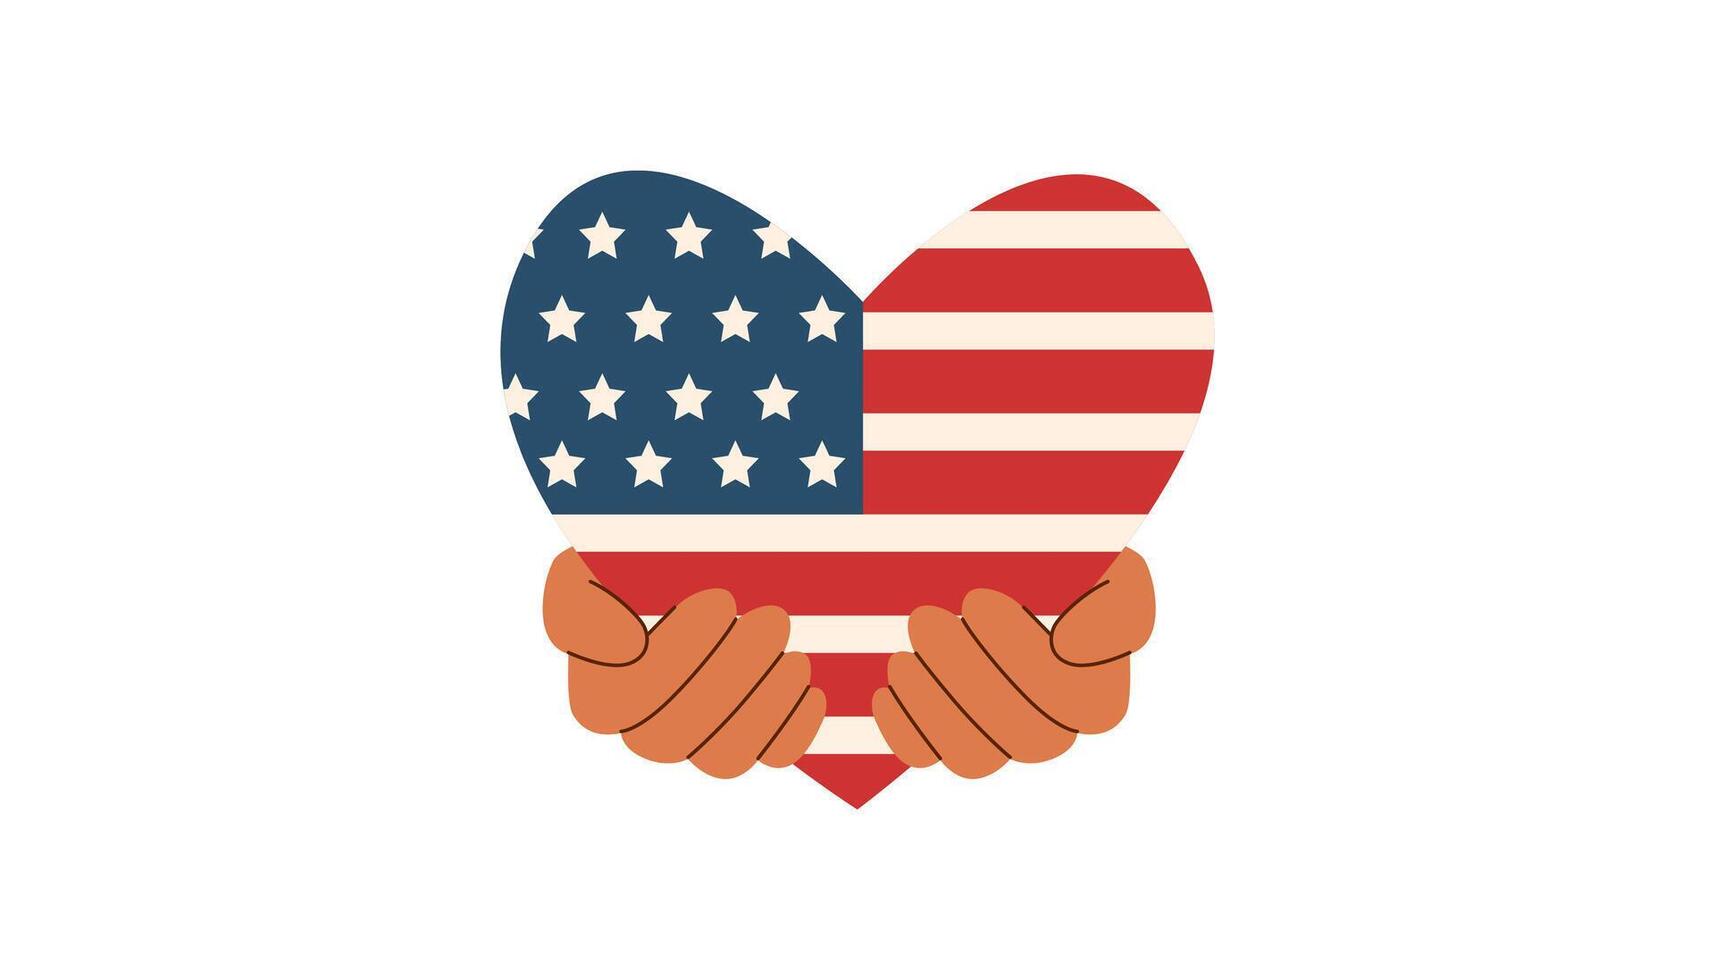 Hands holding american flag in the shape of heart. Memorial day and Independence day concept. vector